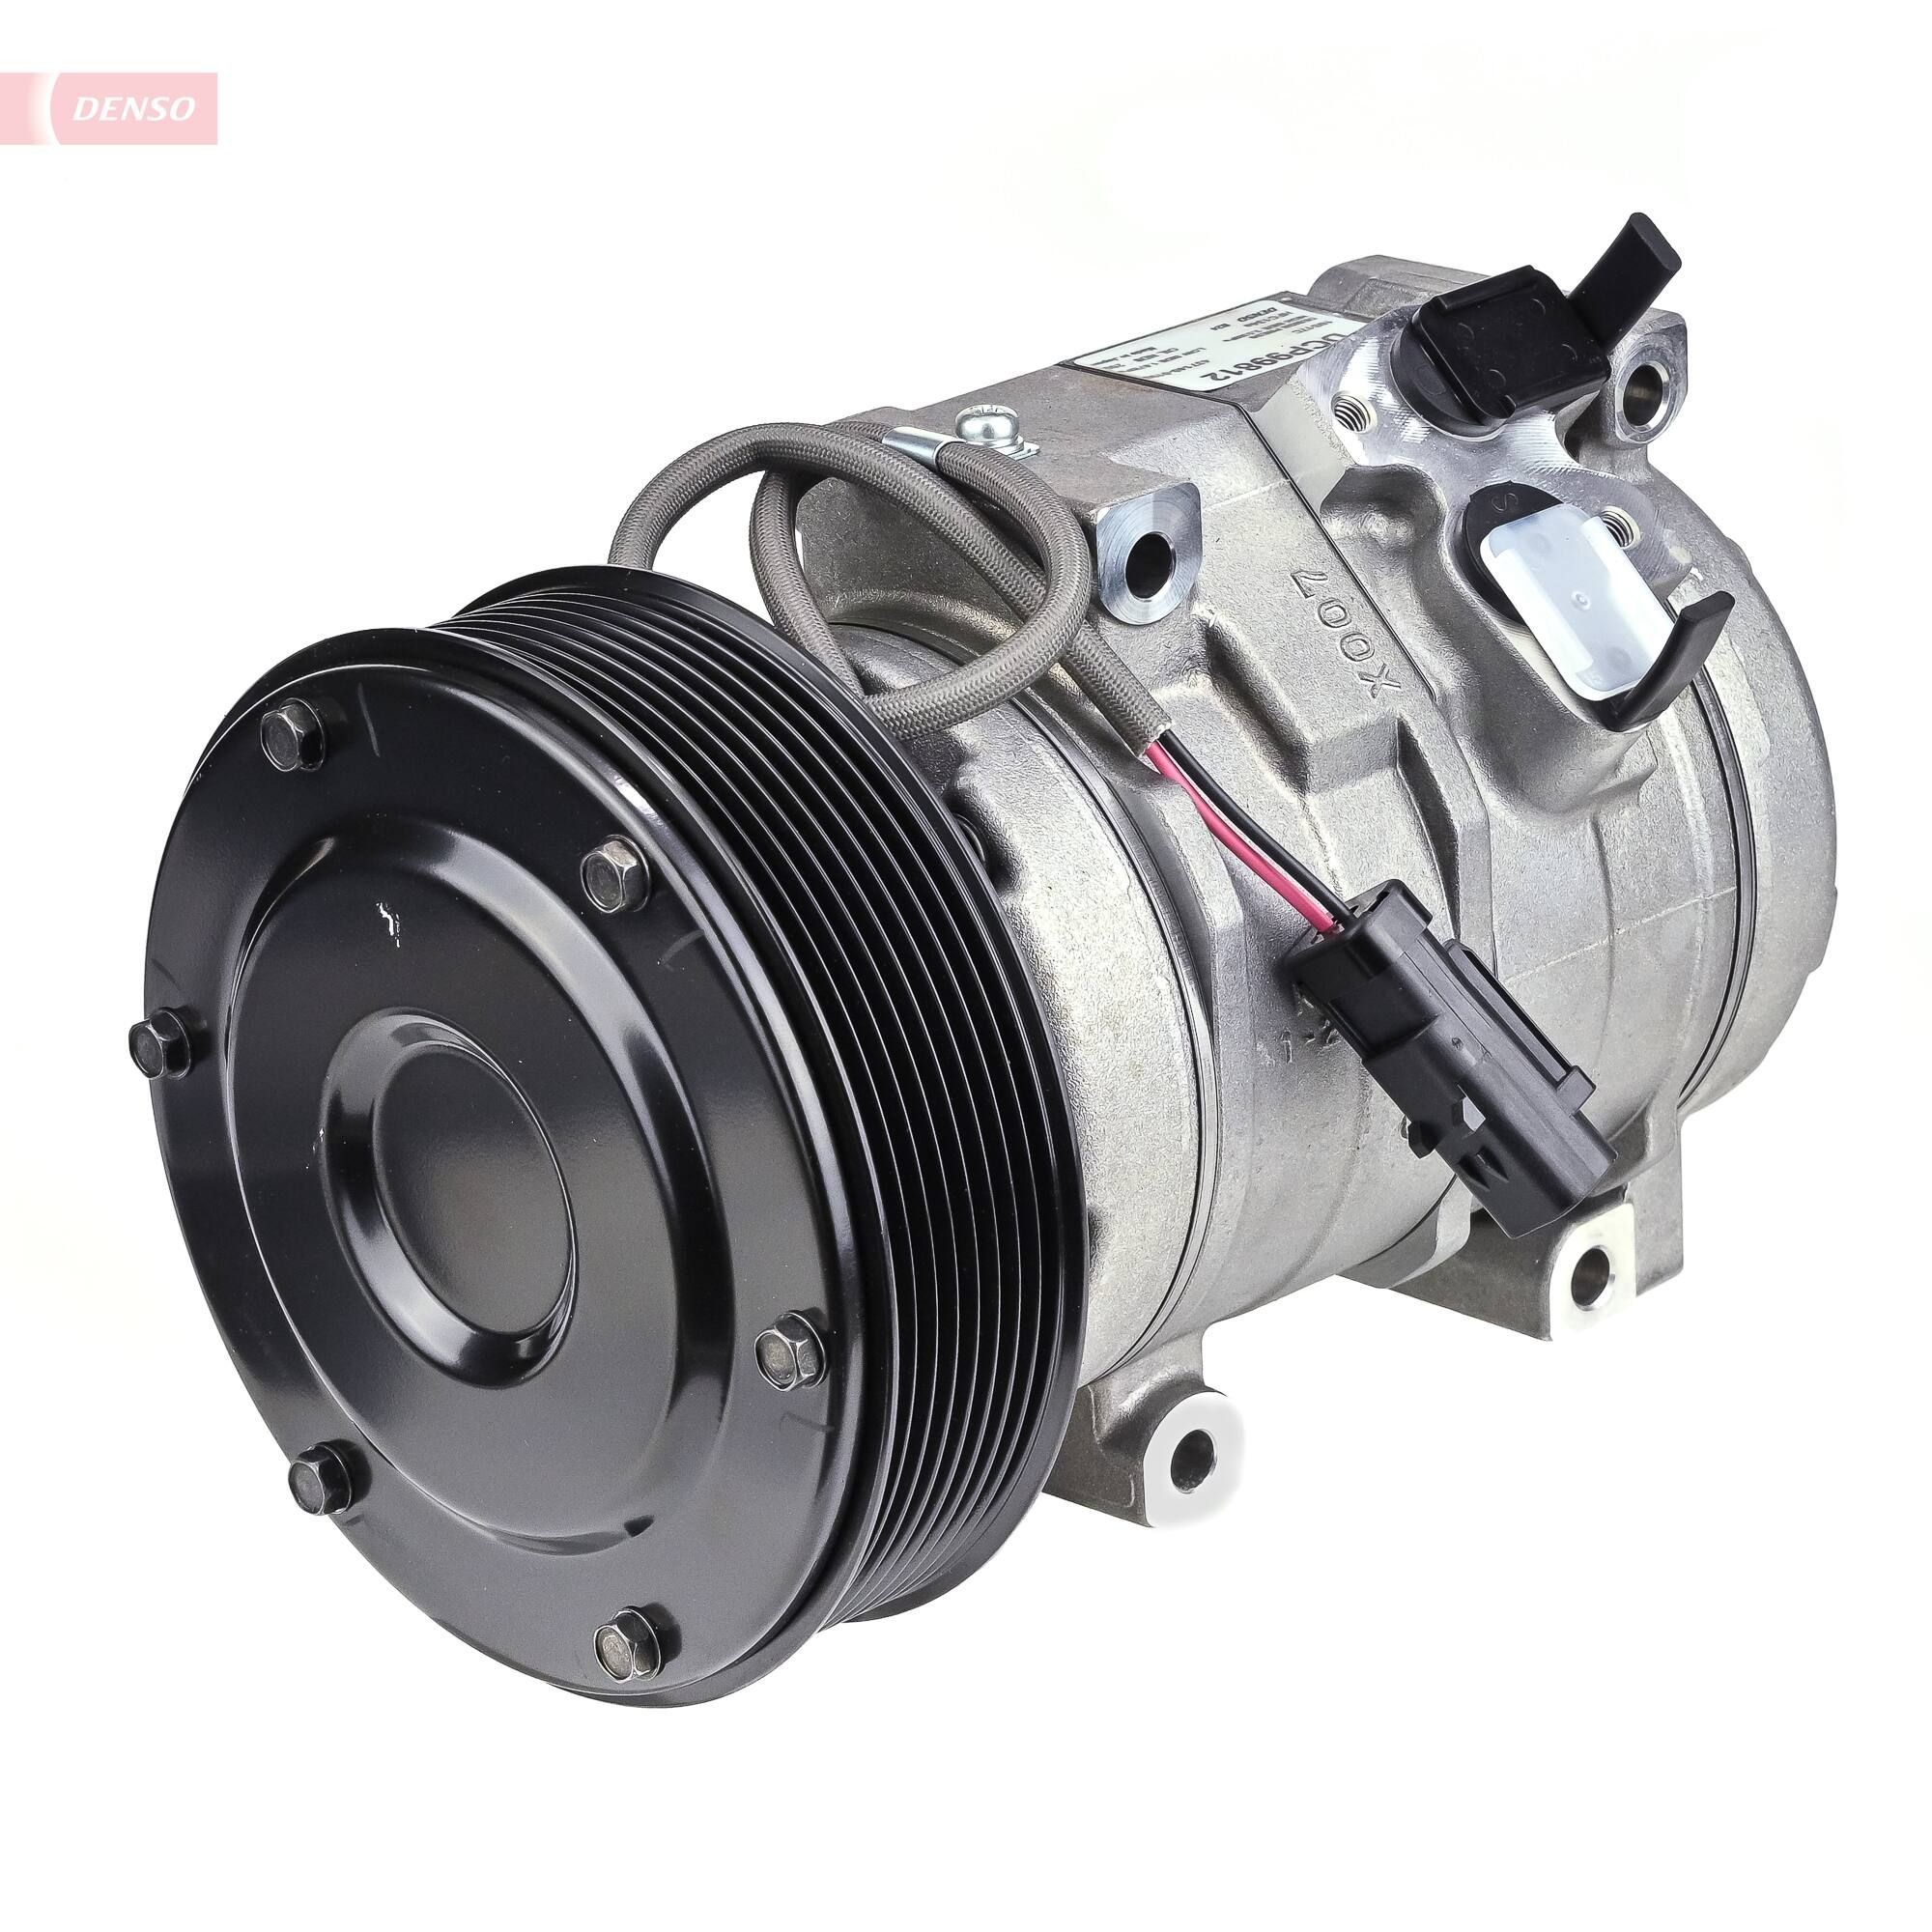 DENSO 10S17C, 24V, PAG 46, R 134a, with magnetic clutch Belt Pulley Ø: 140mm, Number of grooves: 8 AC compressor DCP99812 buy